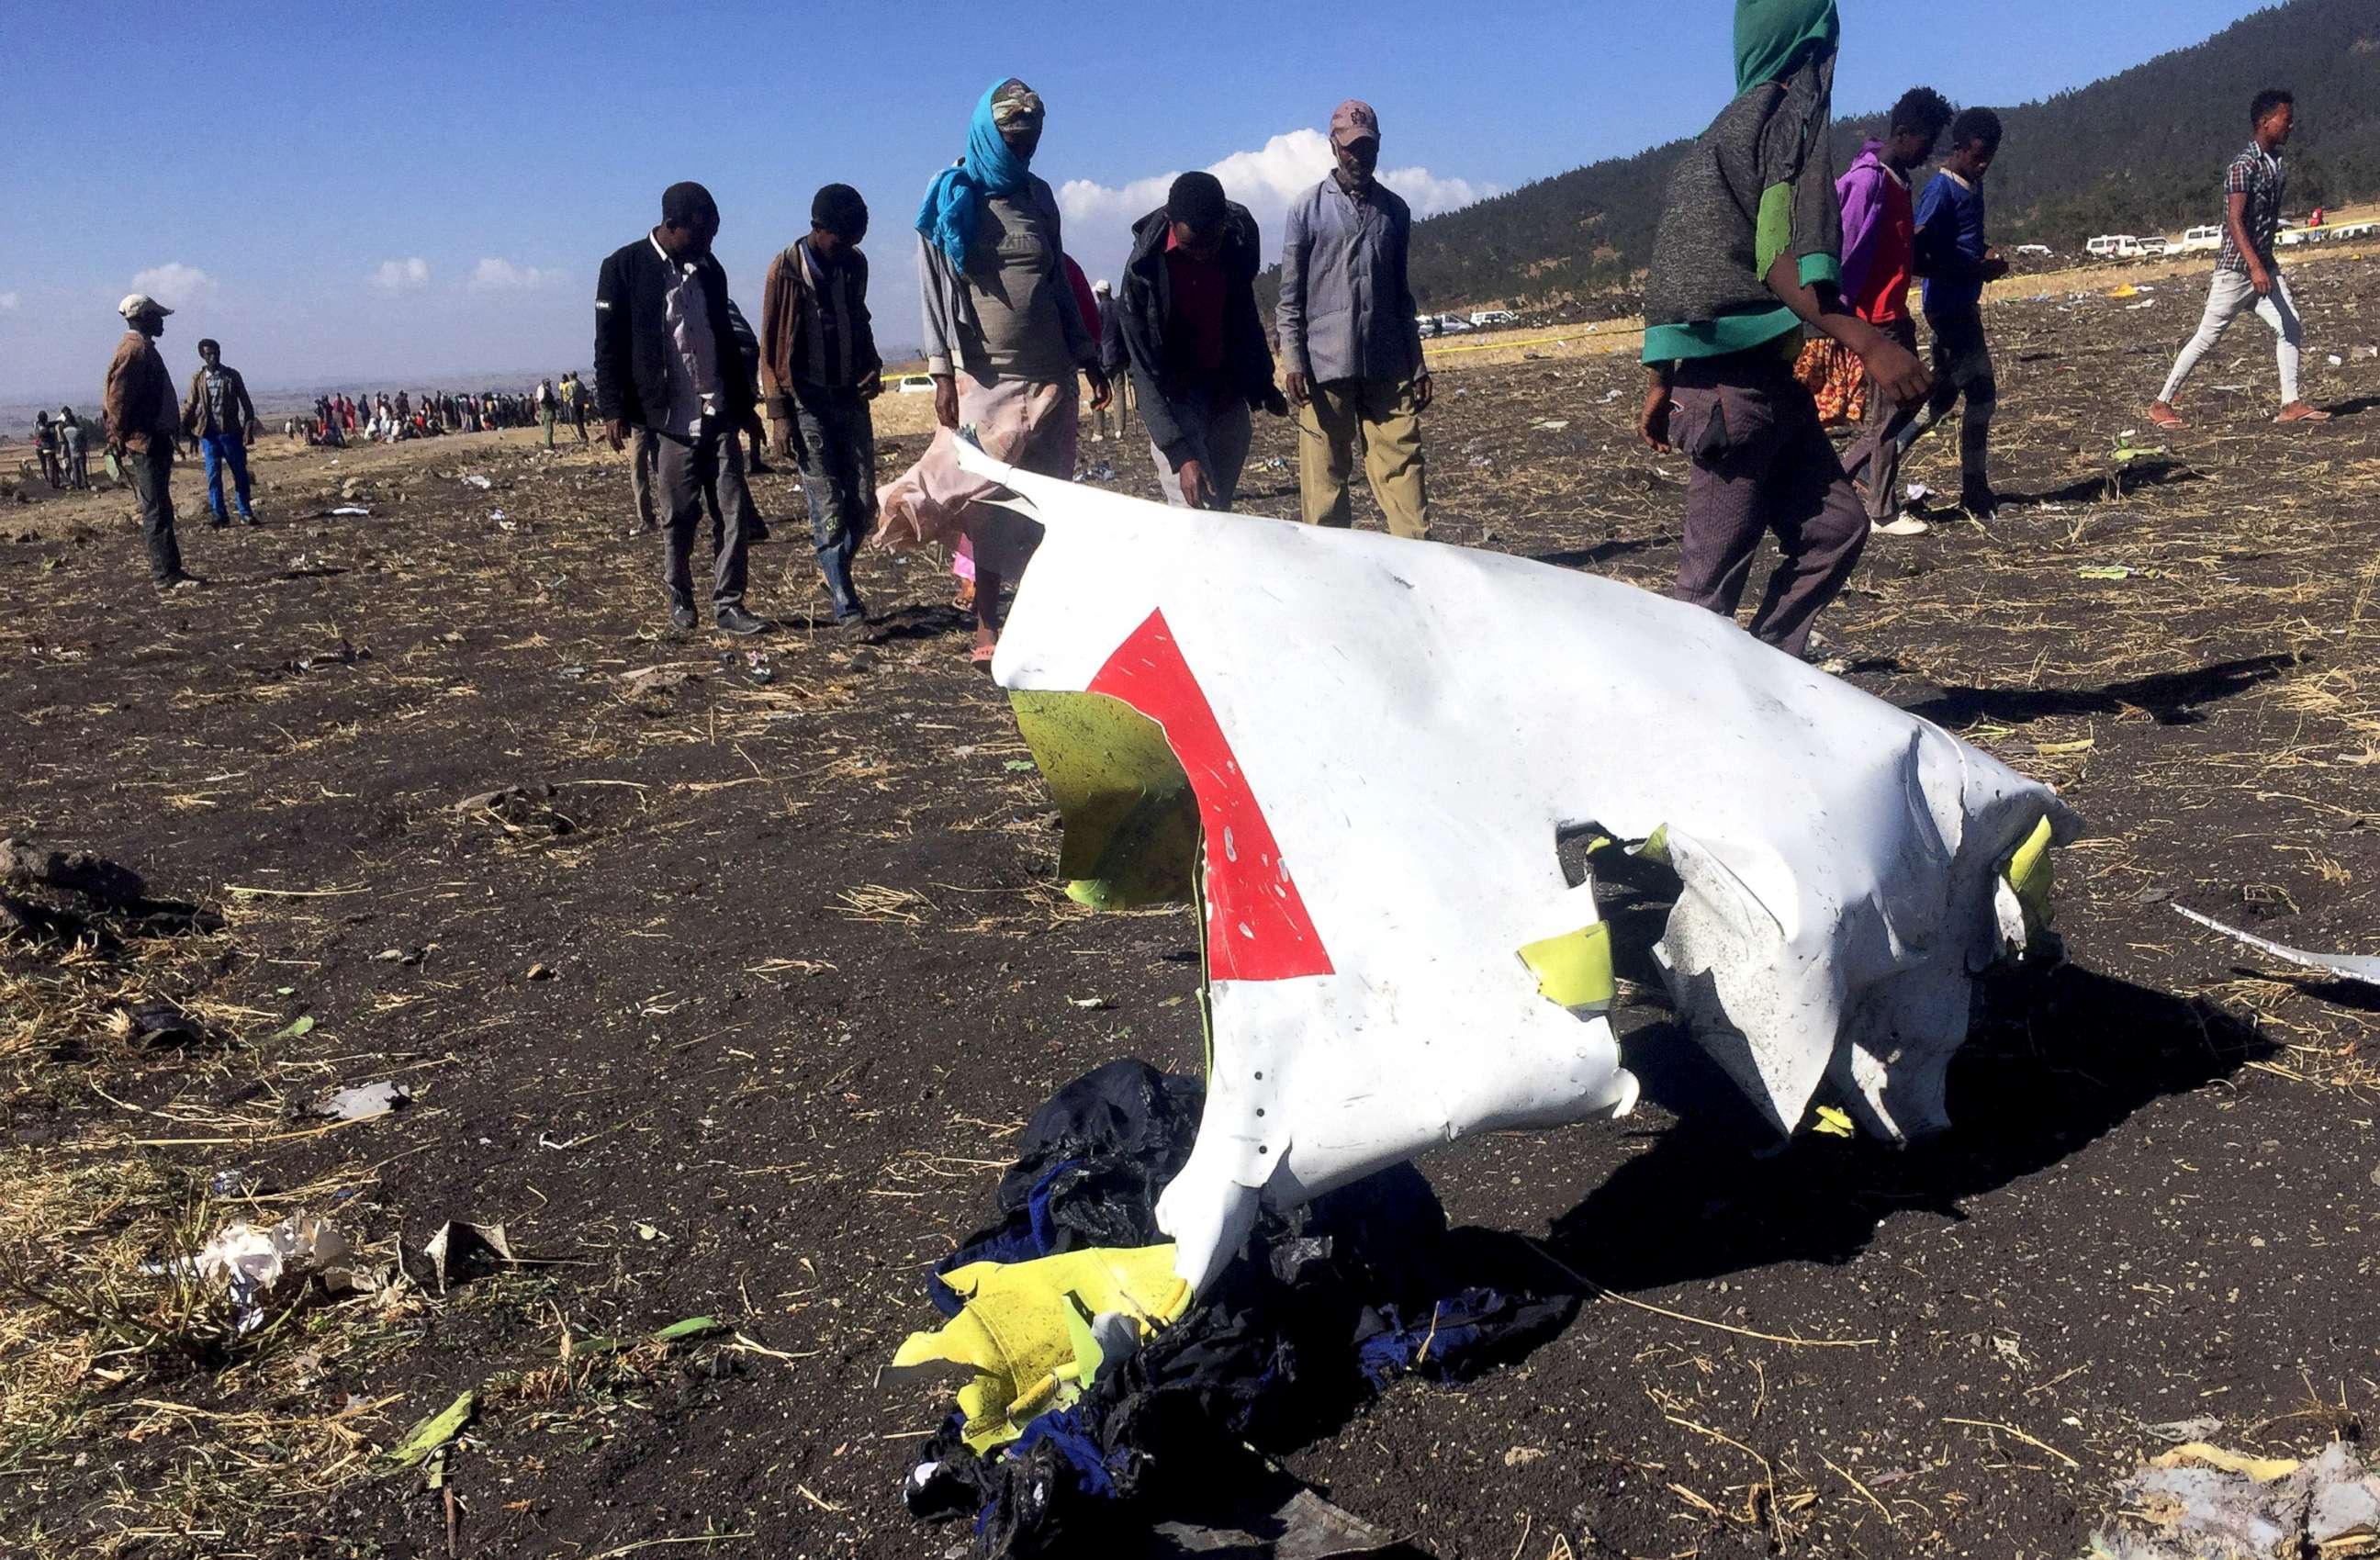 PHOTO: People walk past a part of the wreckage at the scene of the Ethiopian Airlines Flight ET 302 plane crash, near the town of Bishoftu, southeast of Addis Ababa, Ethiopia, March 10, 2019.